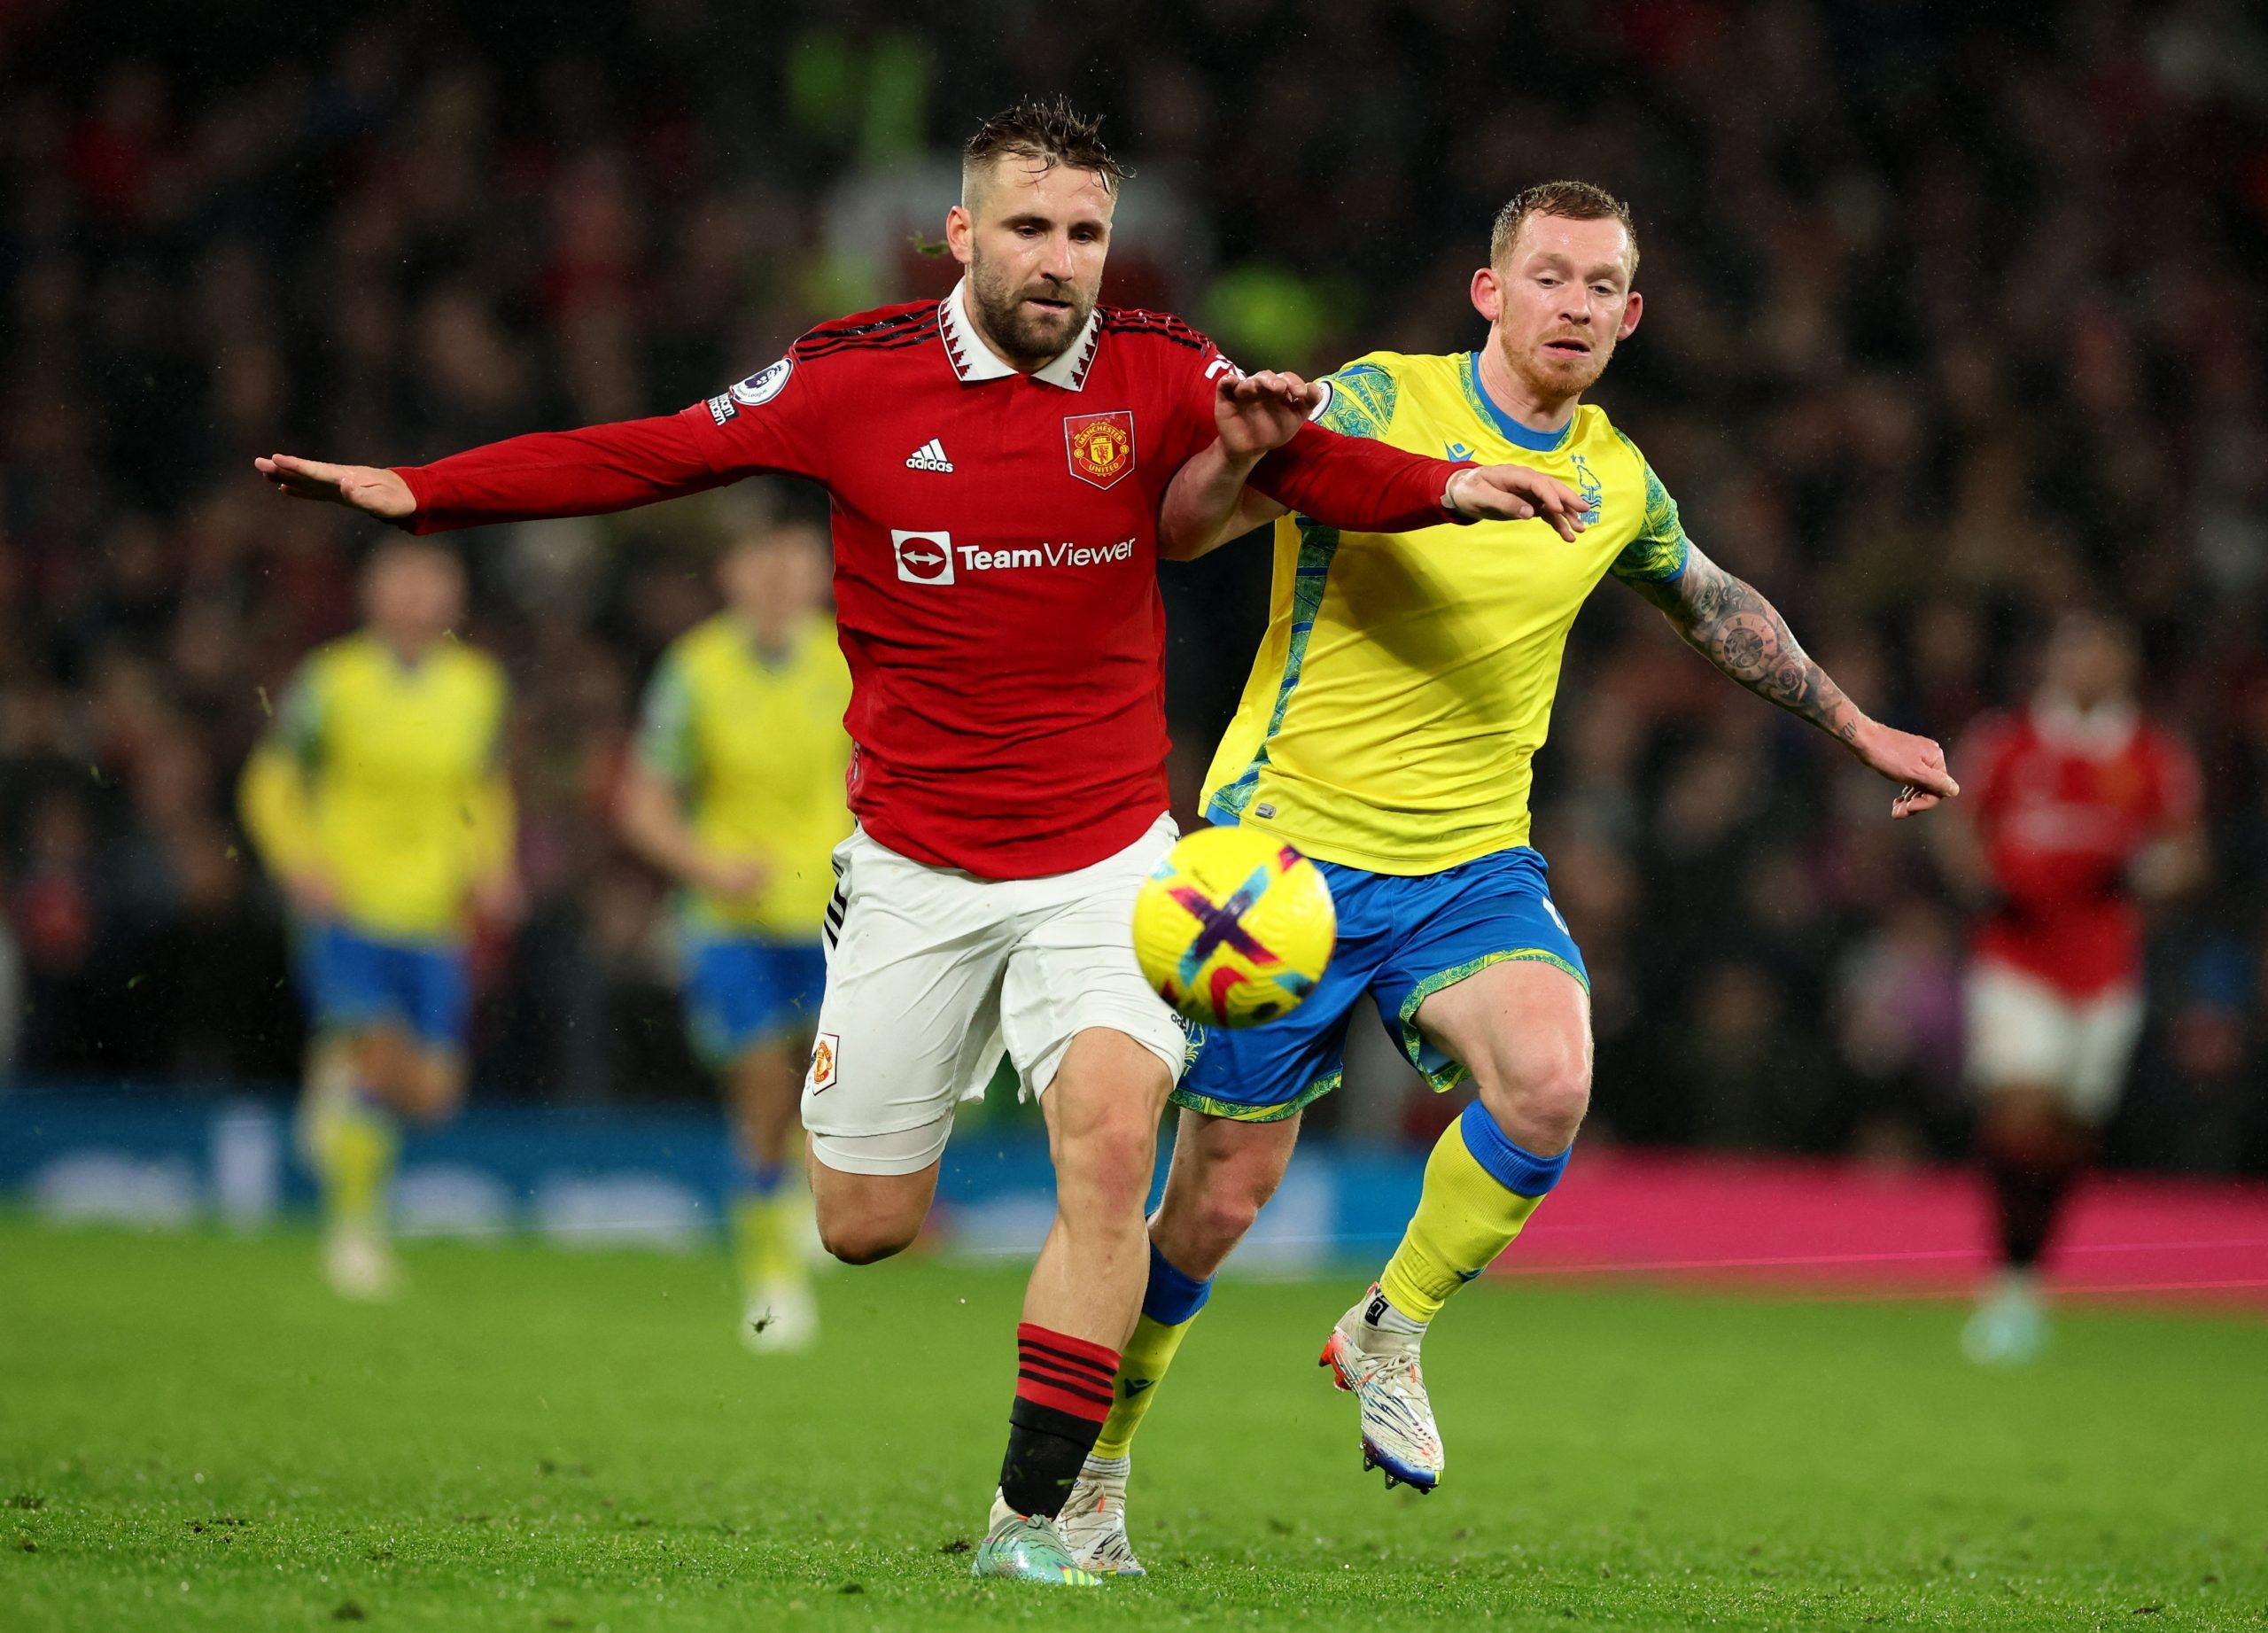  luke-shaw-performance-in-numbers-manchester-united-nottingham-forest-premier-league.jpg